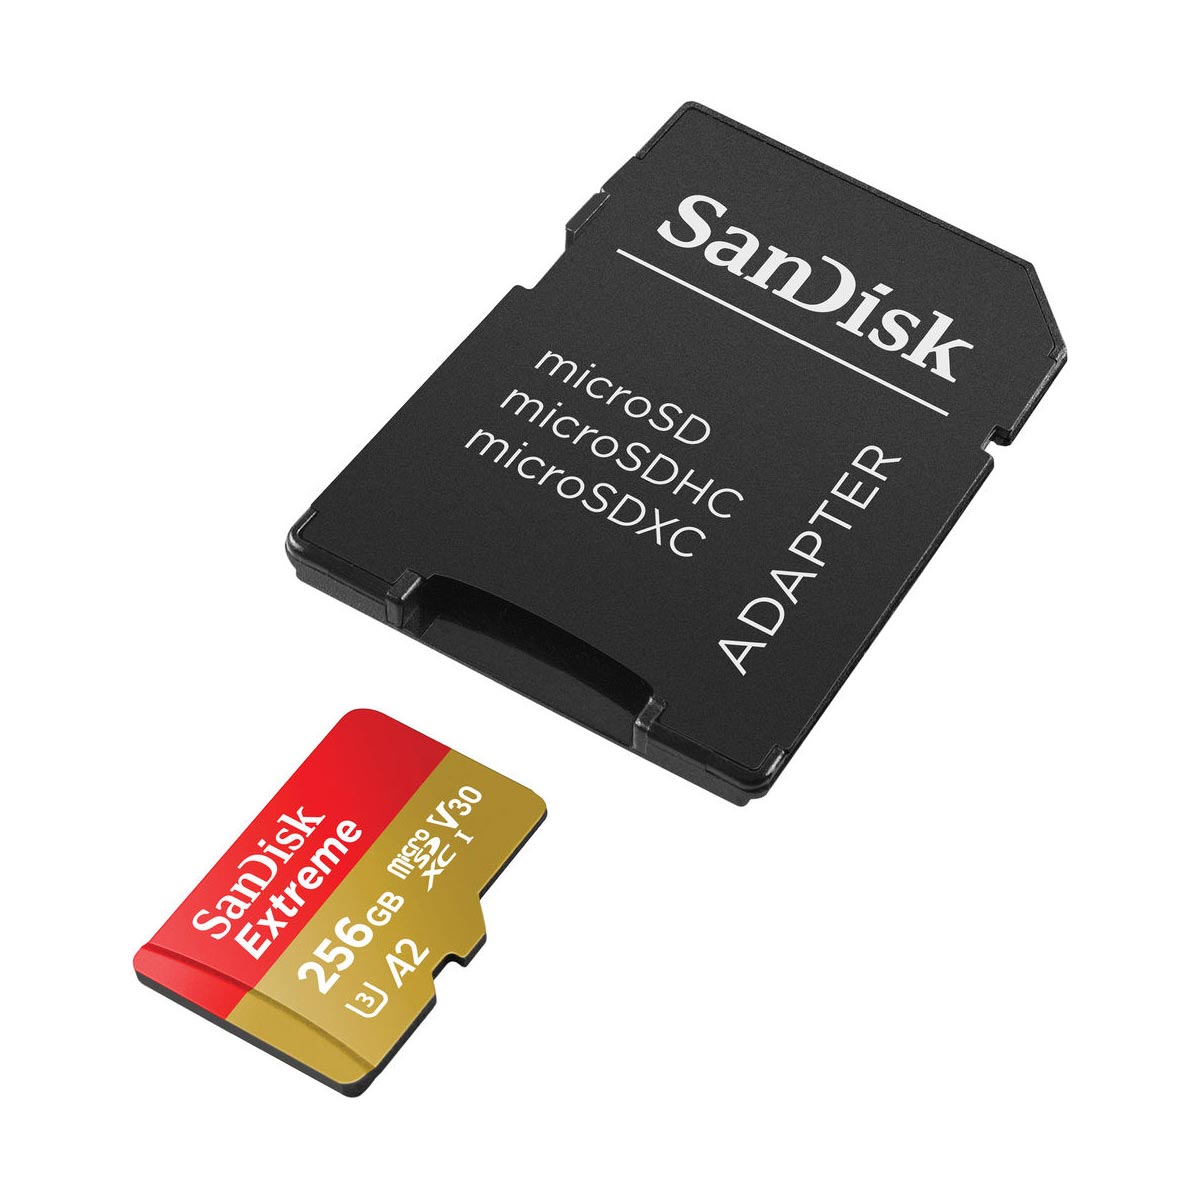 SanDisk 256GB Extreme UHS-I microSDXC (V30) 190mb/s Memory Card with SD Adapter